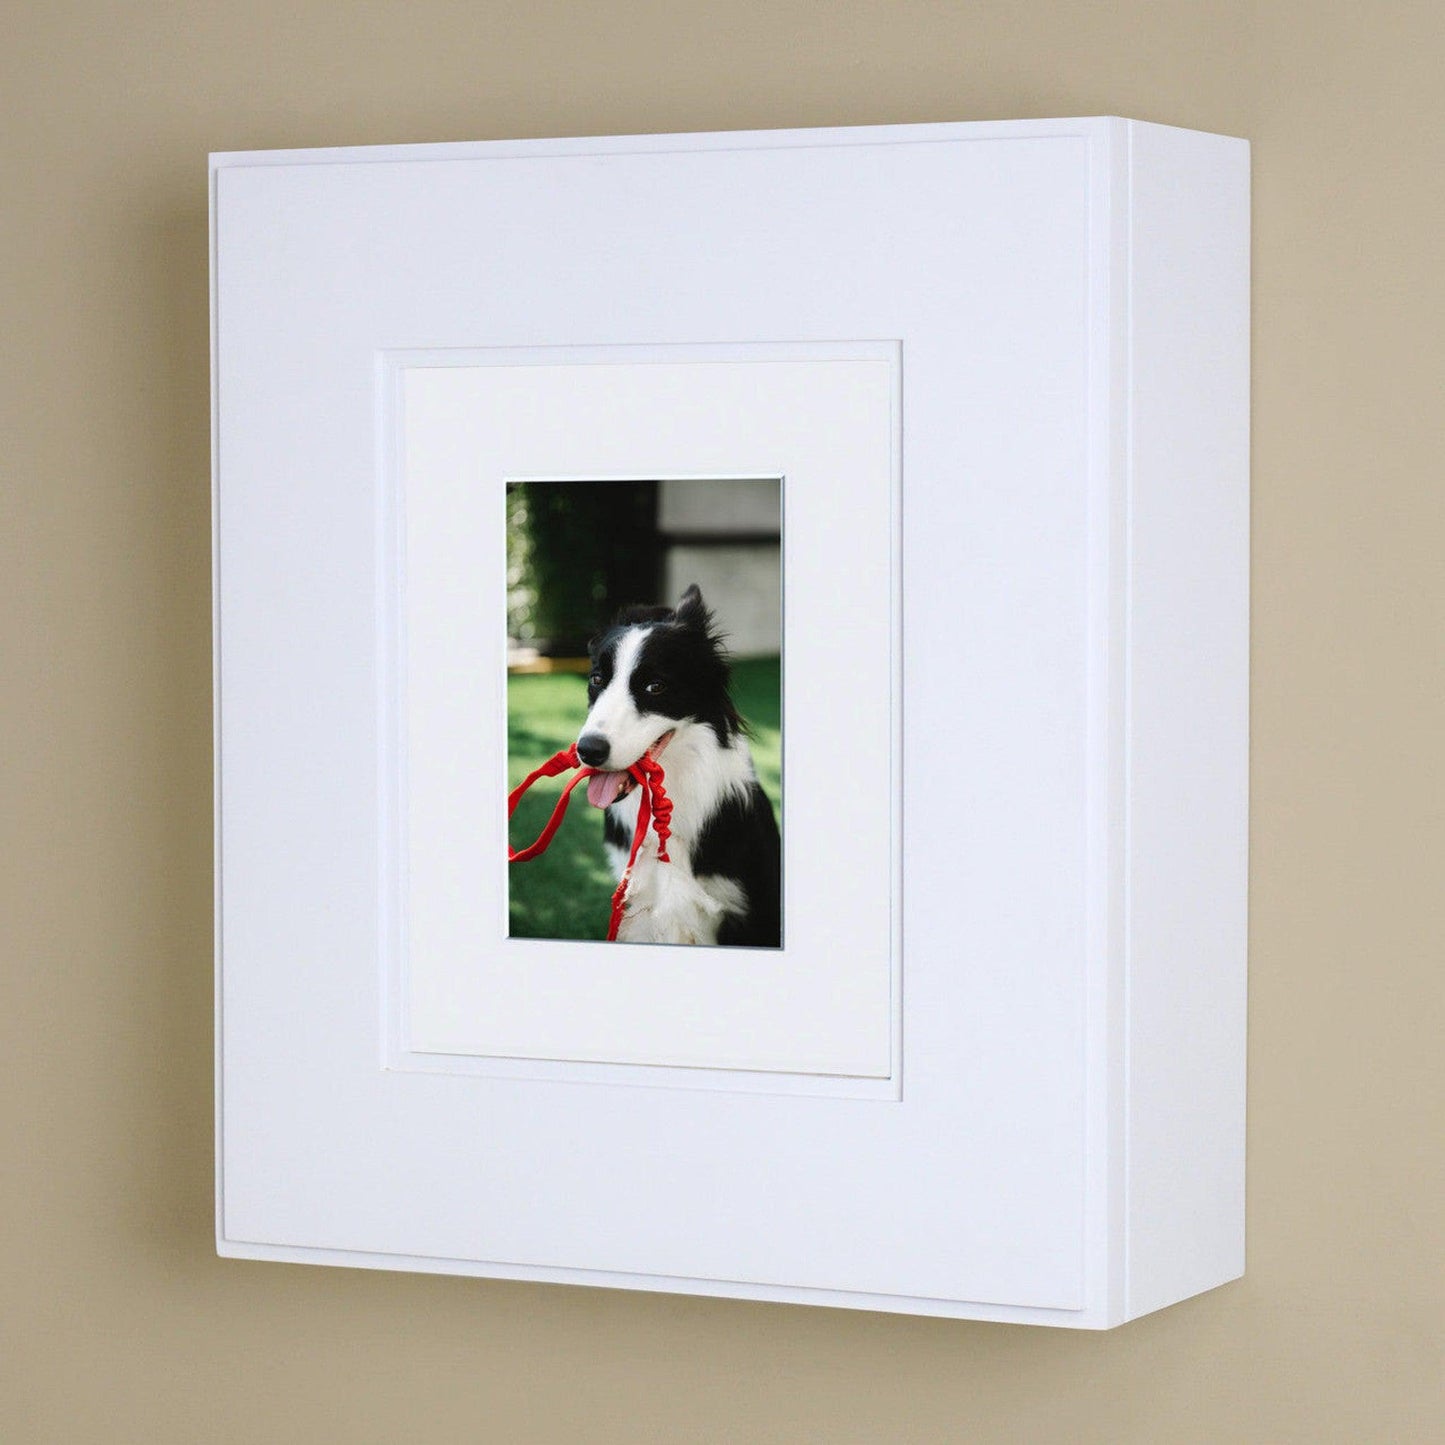 Fox Hollow Furnishings 15" H x 13" W White Shaker Wall Mount Picture Frame Medicine Cabinet With Mirror and Ivory 5" x 7" Matting